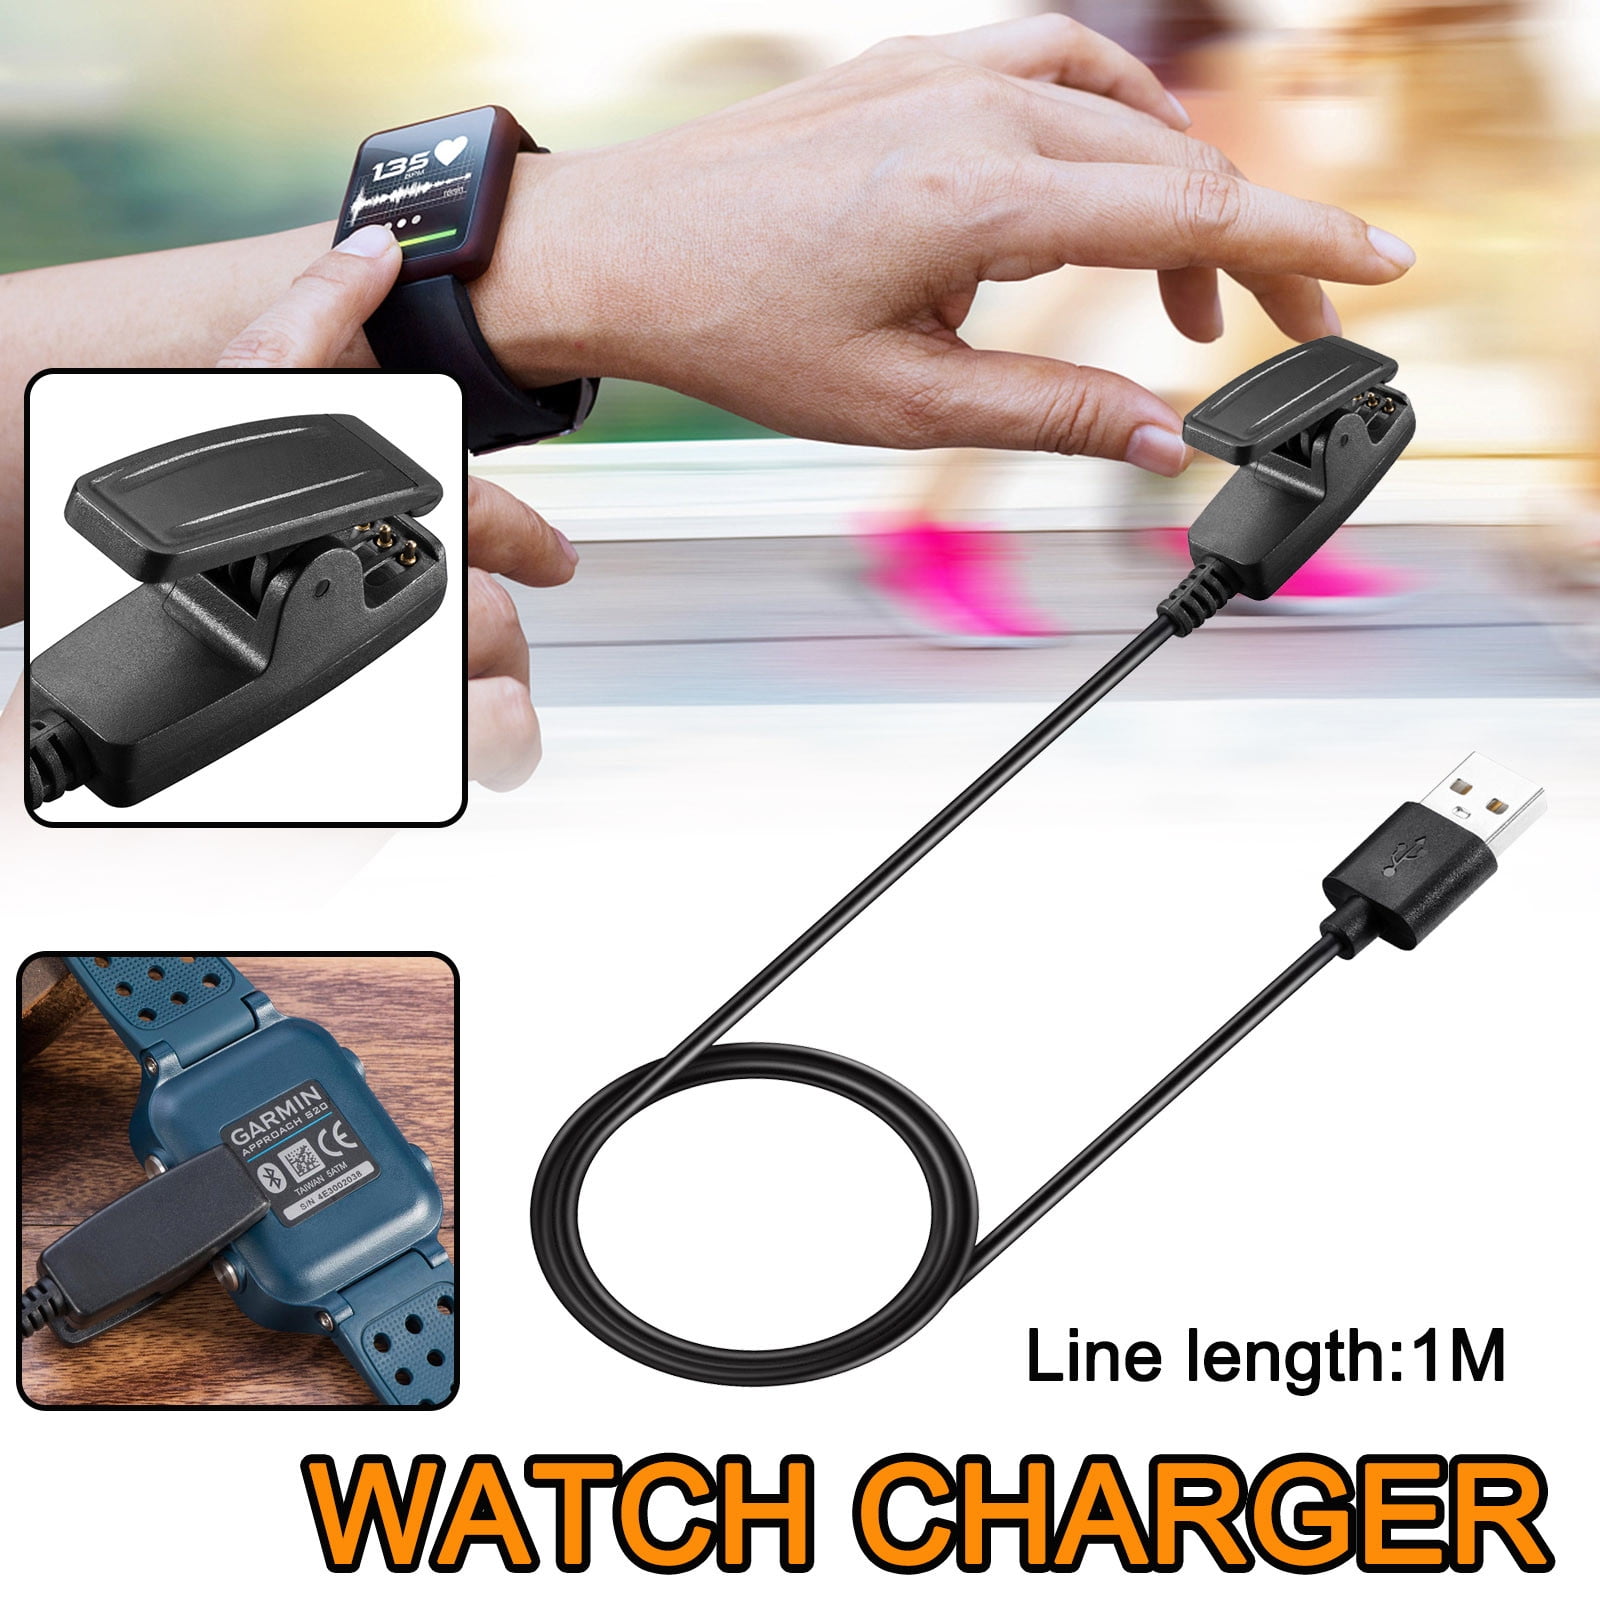 Watch Lily/Garmin Cable Usb Charger Cradle Vivomove Smart Compitable With Garmin Watch Charging Wristband Accessories Smart For Women Men - Walmart.com